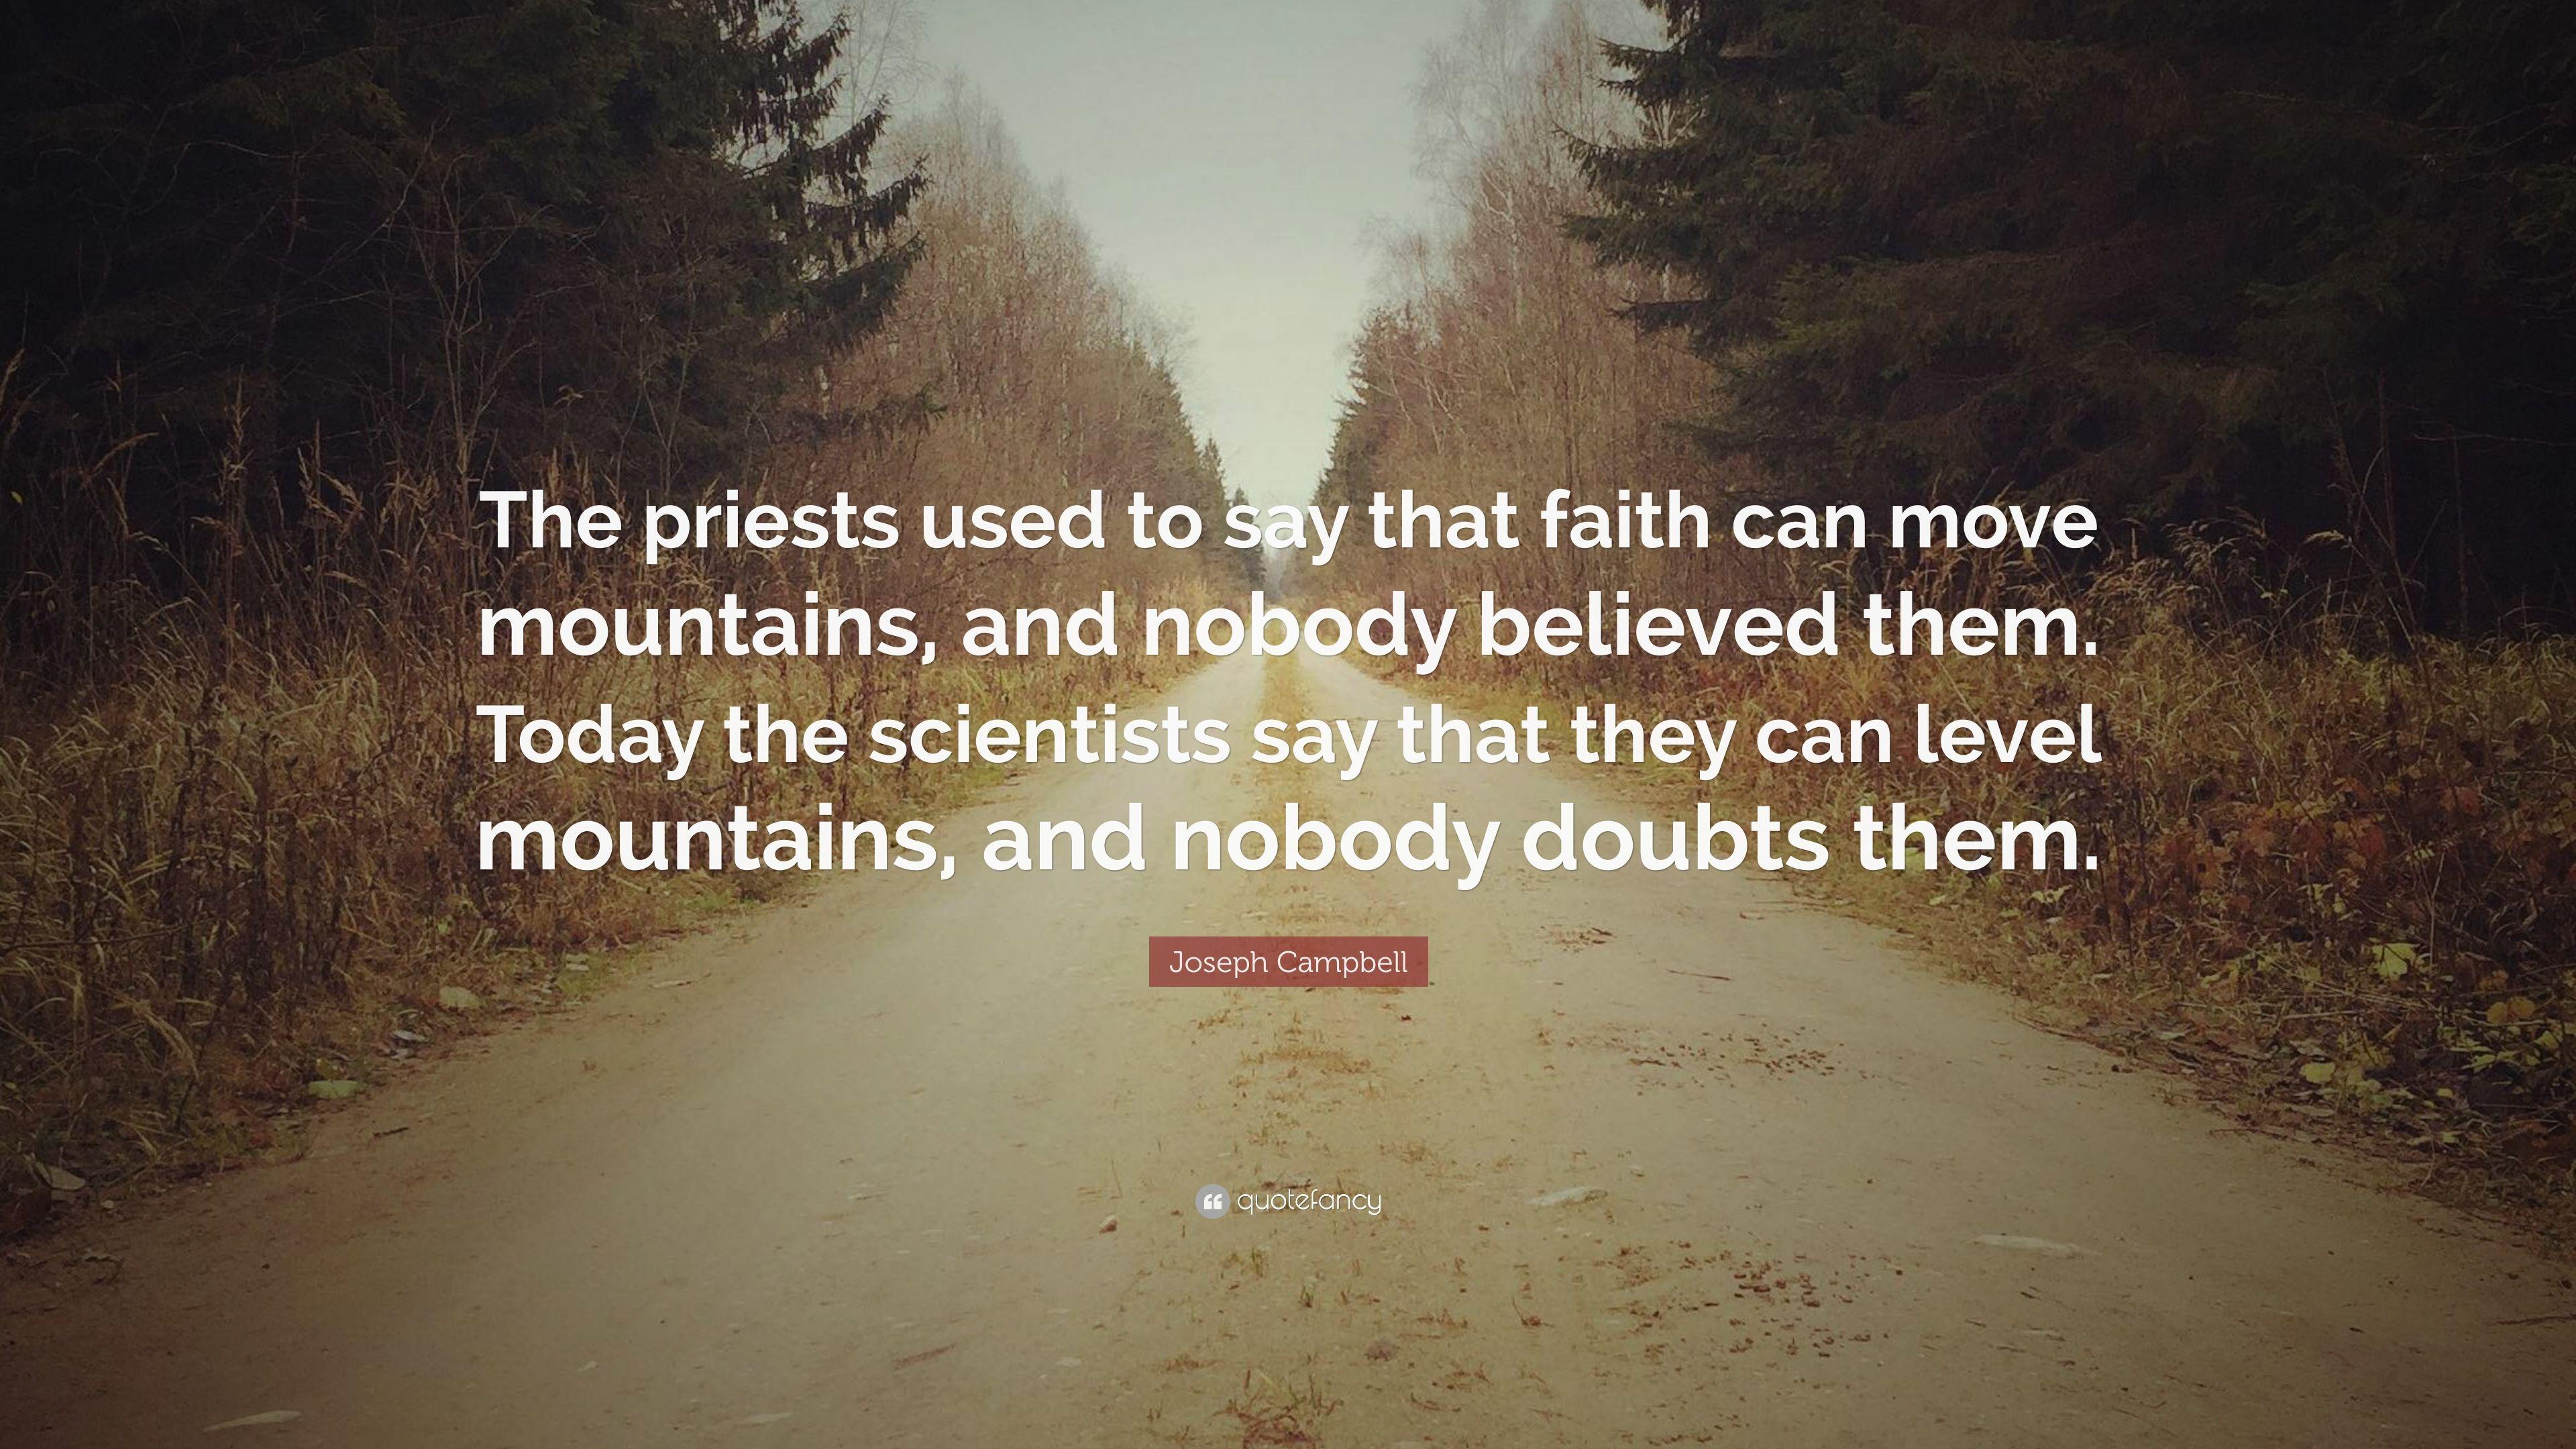 Joseph Campbell Quote: “The priests used to say that faith can move